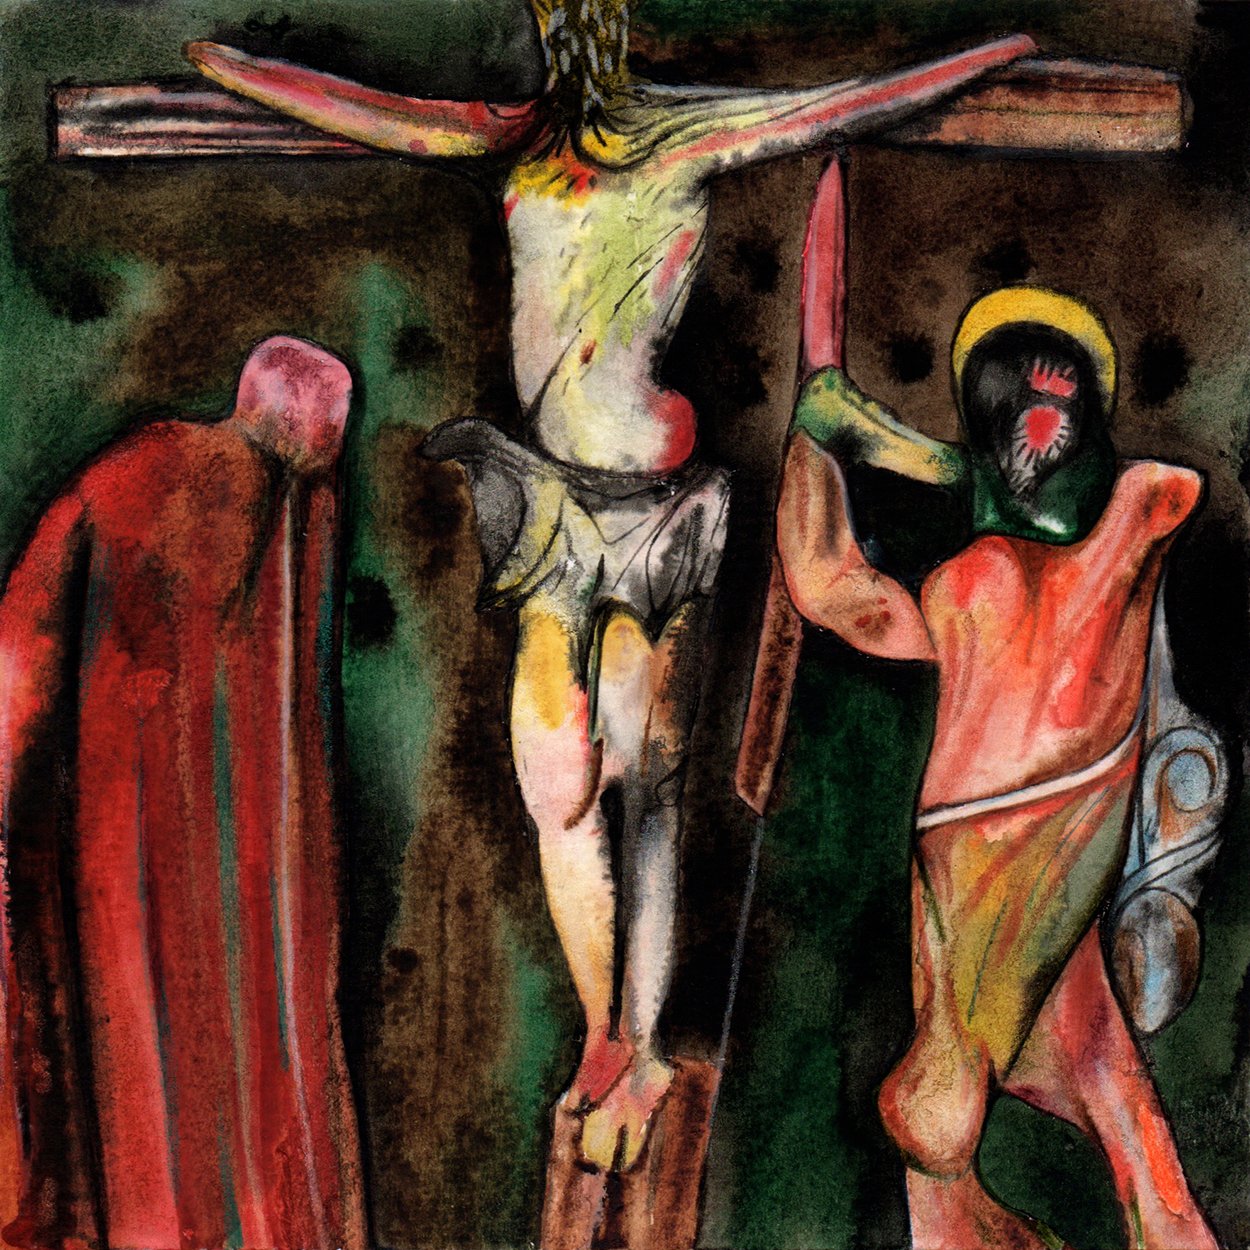 Crucifixion 4 (2nd series).